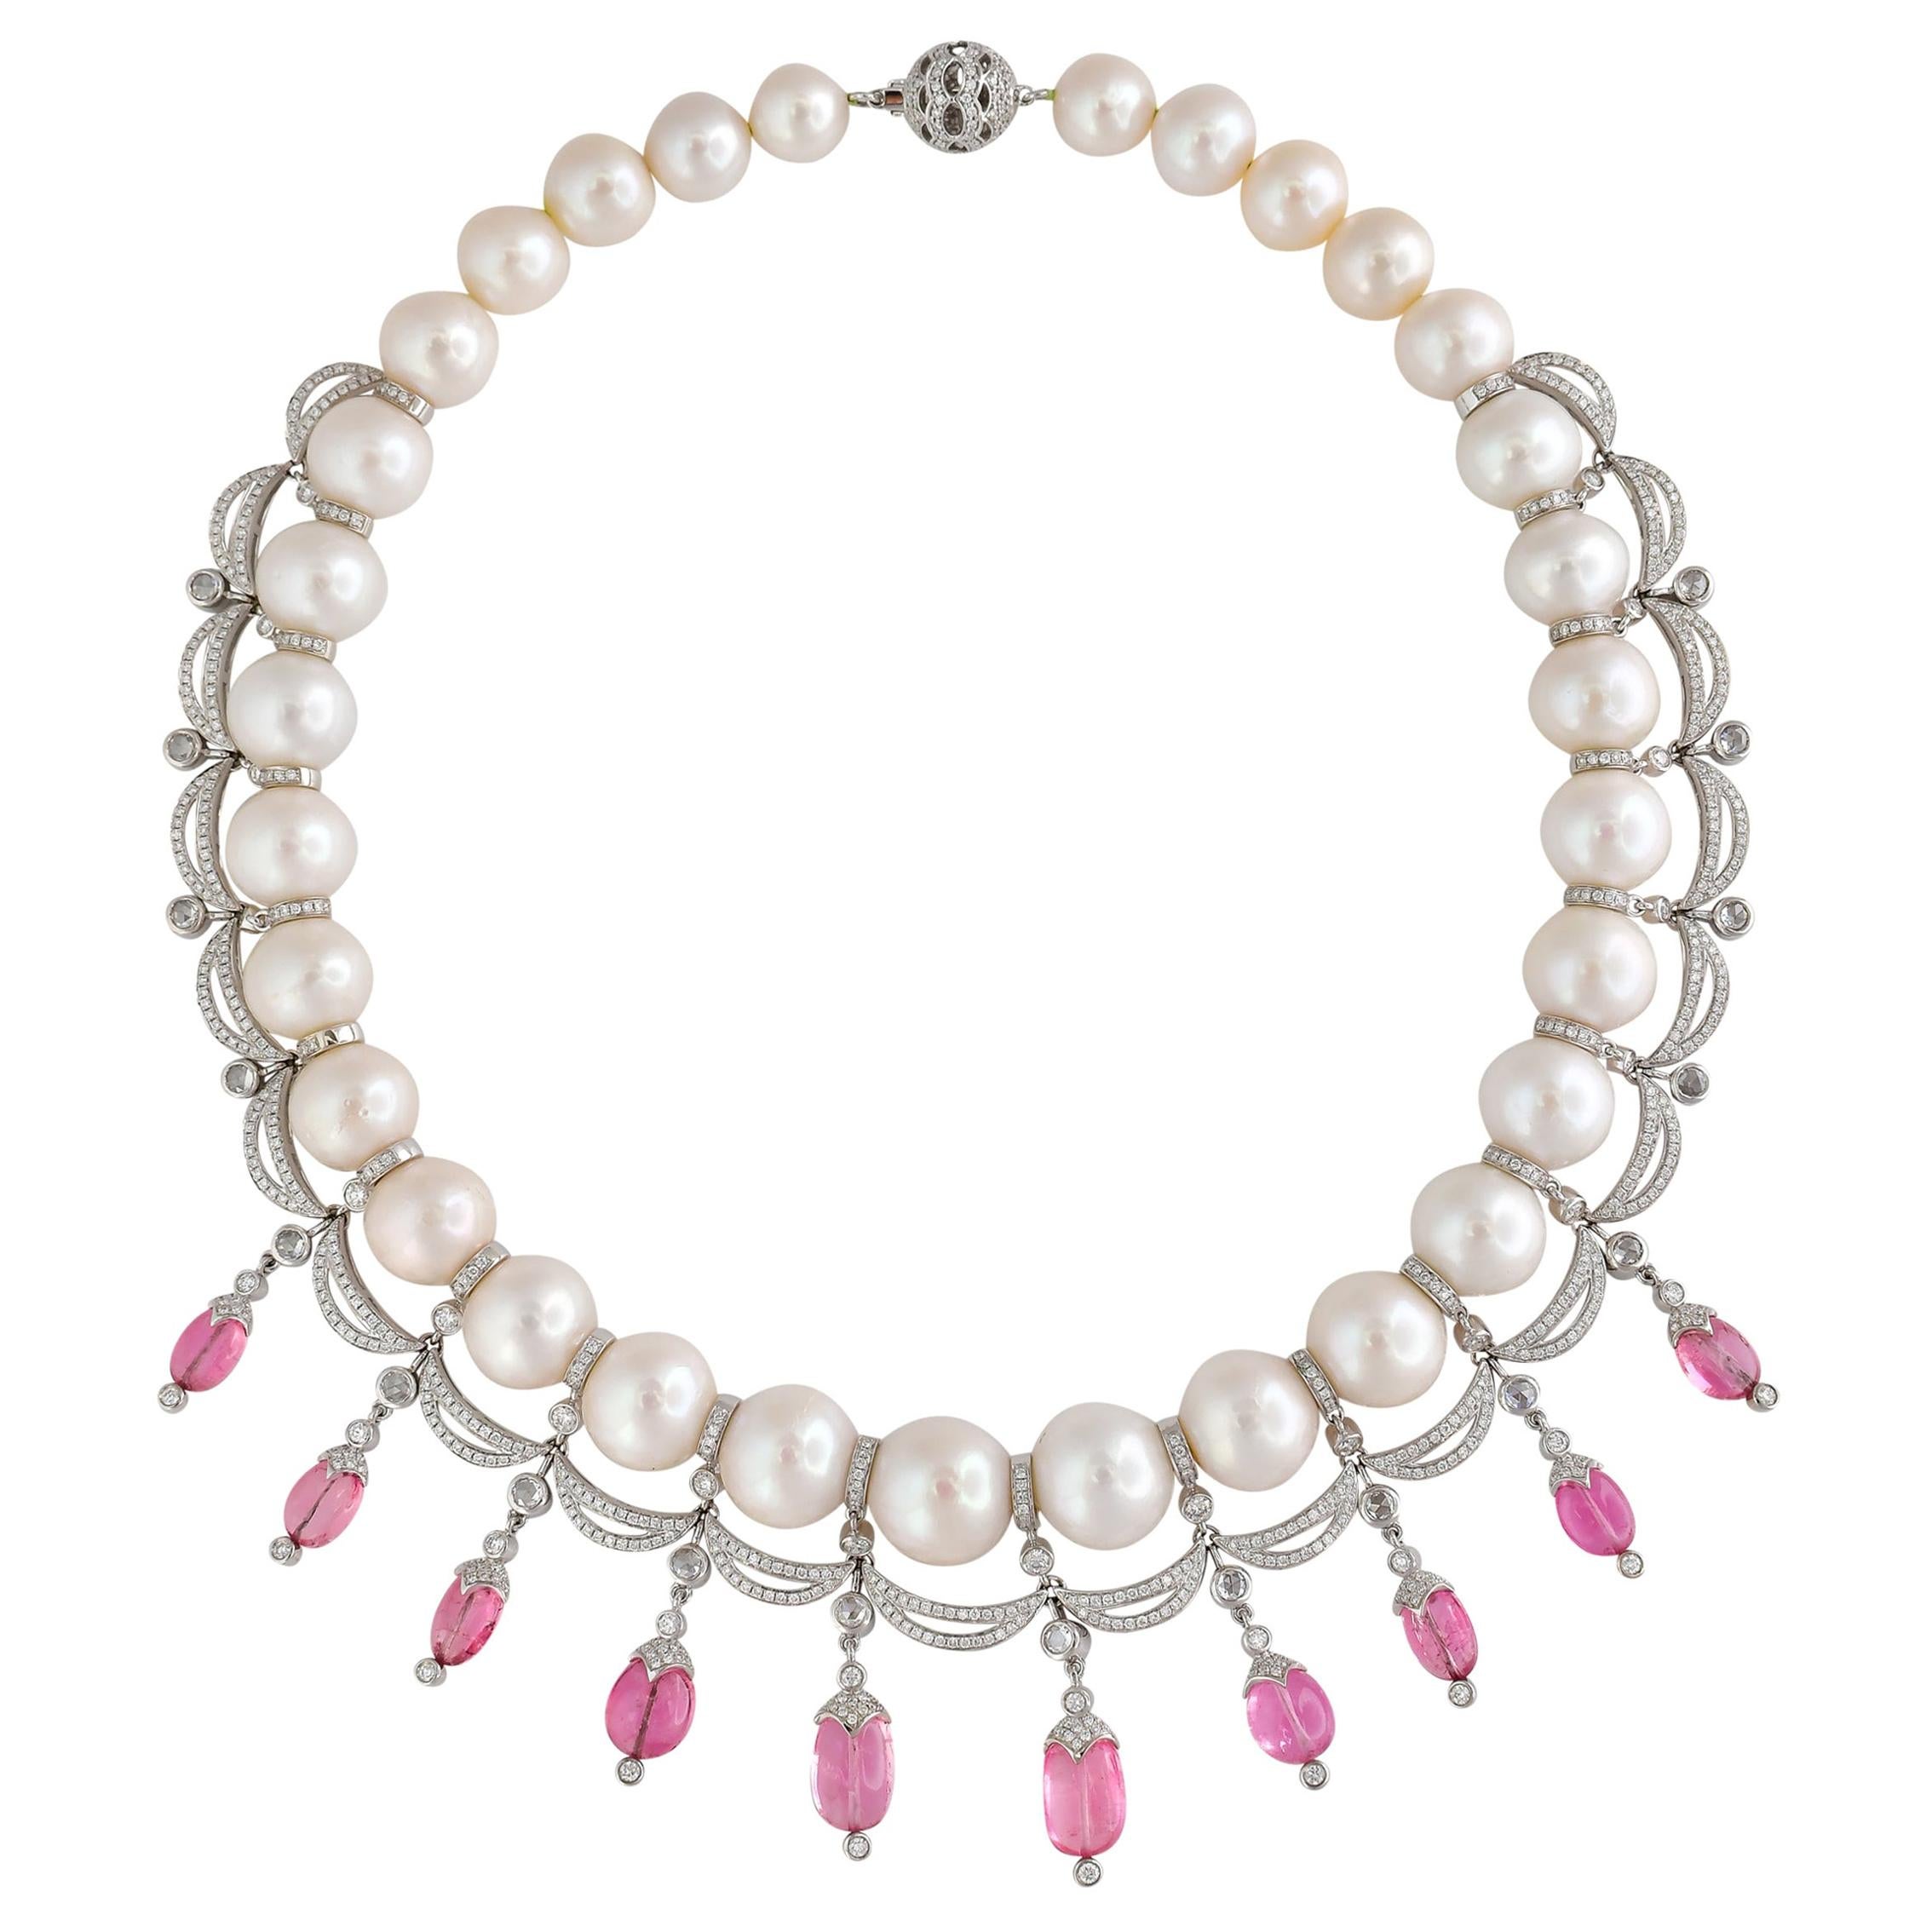 477 Carat Pearl Necklace in 18 Karat Gold with Diamonds and Pink Tourmaline For Sale